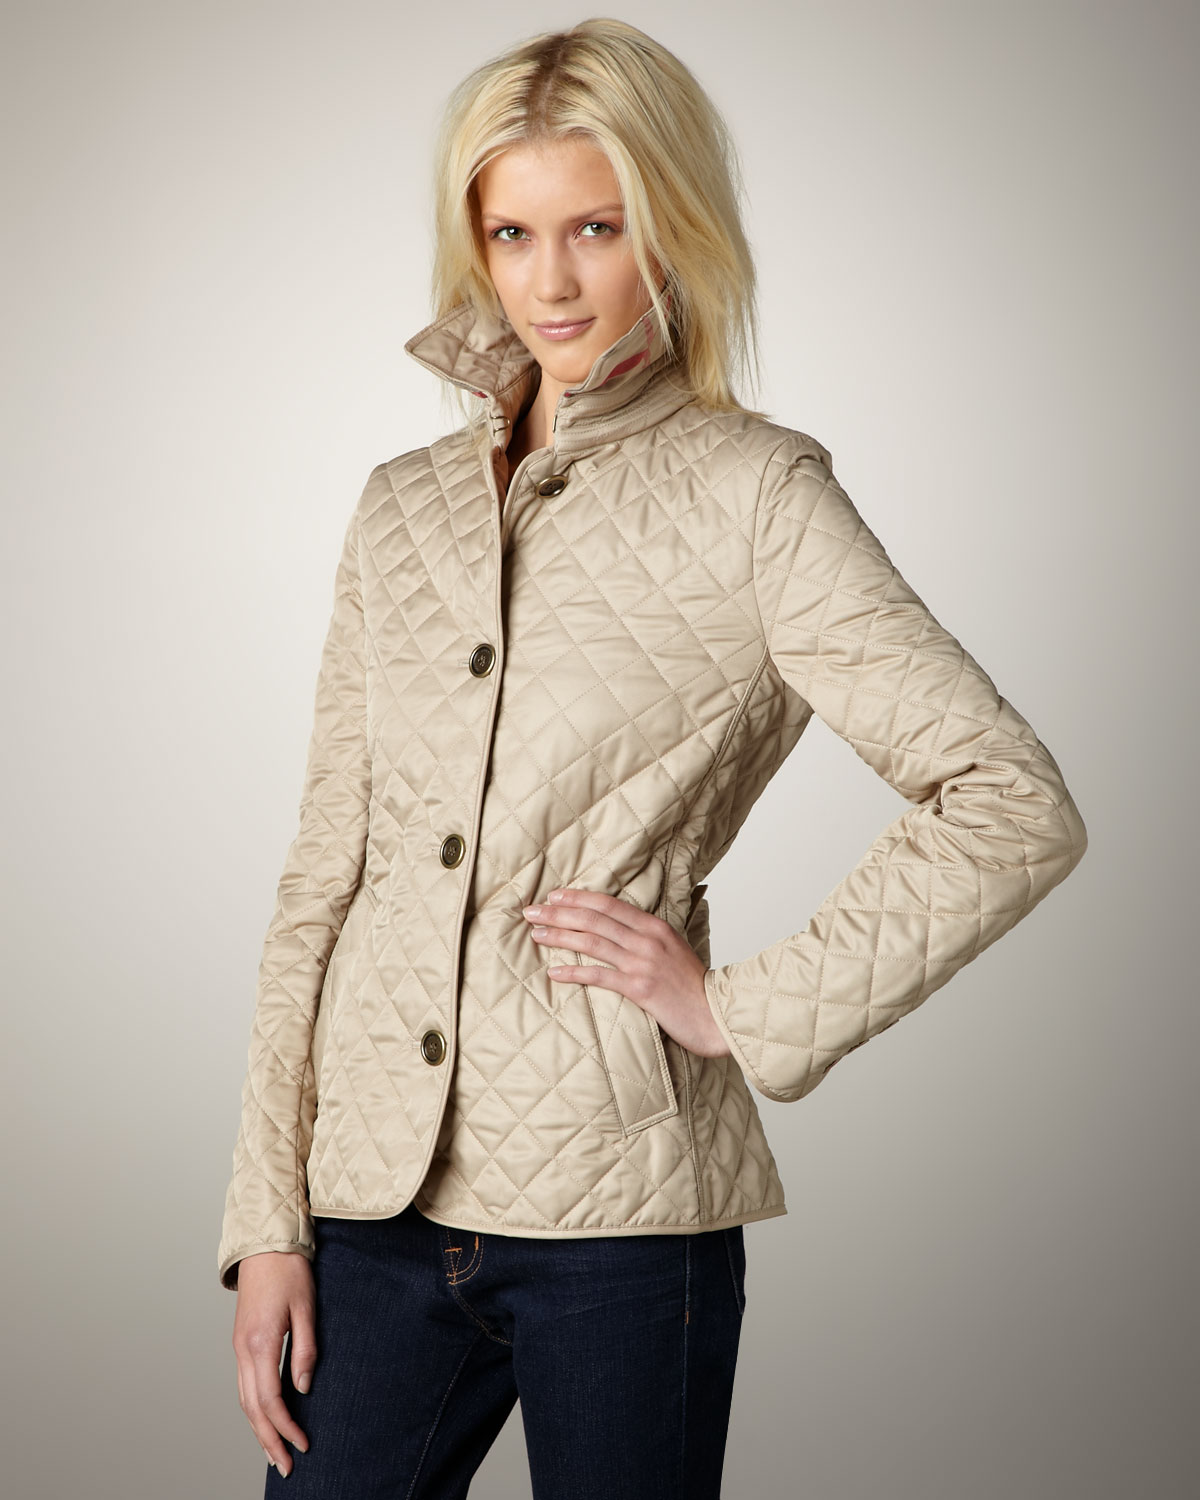 Burberry Brit Quilted Jacket in Natural 